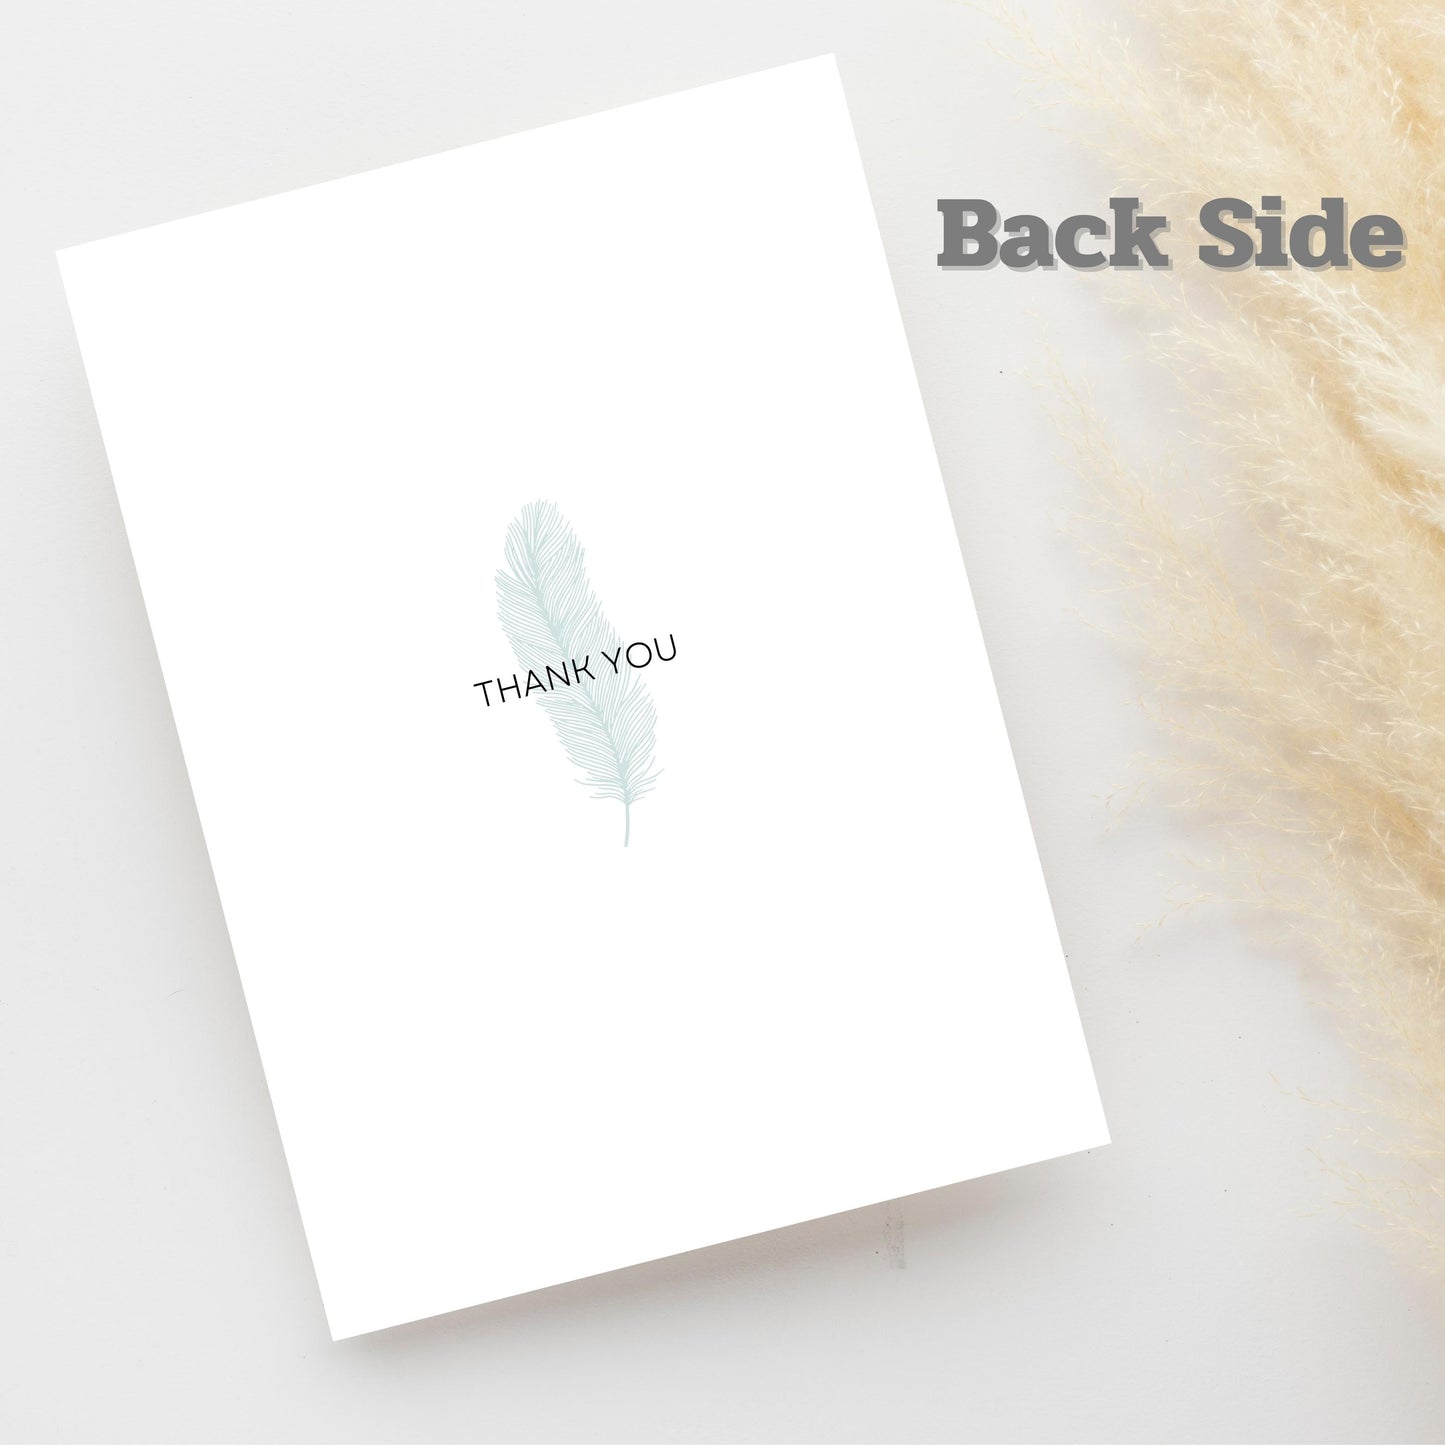 Thank You Printable Card Vol.3, card size 5"x7", print on 8.5"x11" paper size